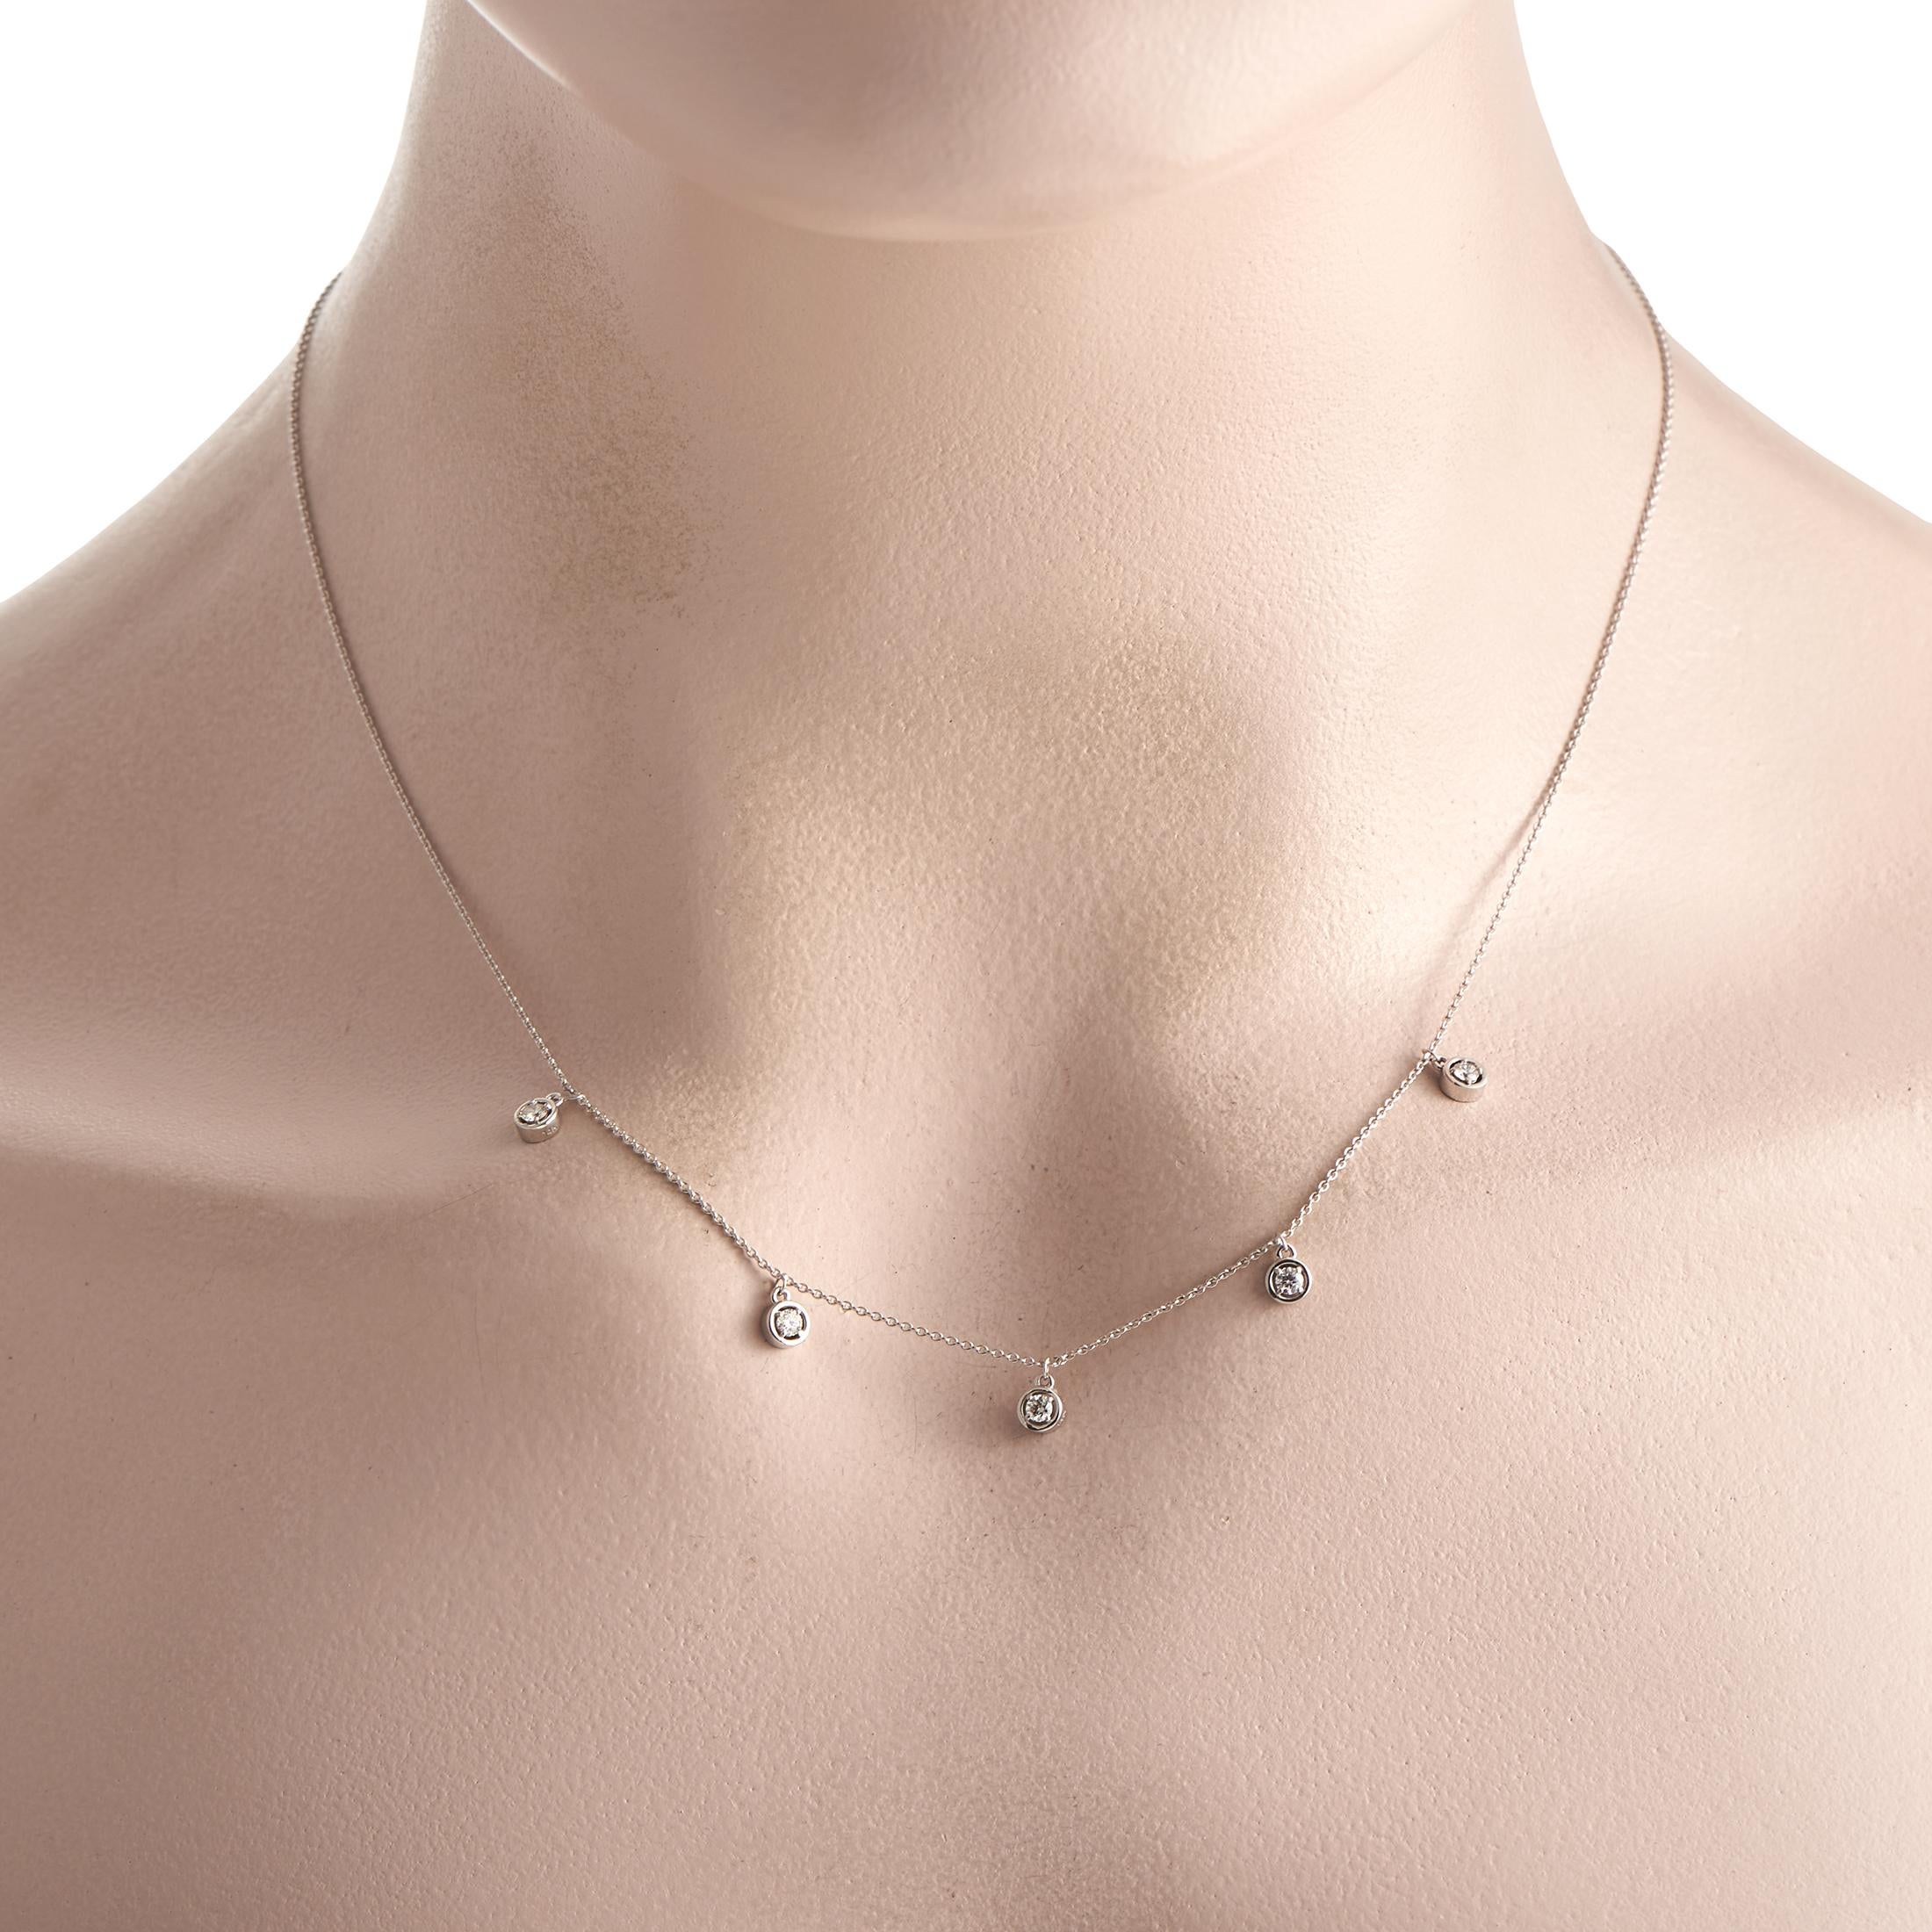 This diamond station necklace can give an instant lift to any outfit. Its minimalist profile and understated sparkle make it suitable for casual, work, evening, or formal wear. The necklace is designed with a 17-long chain and a secure lobster